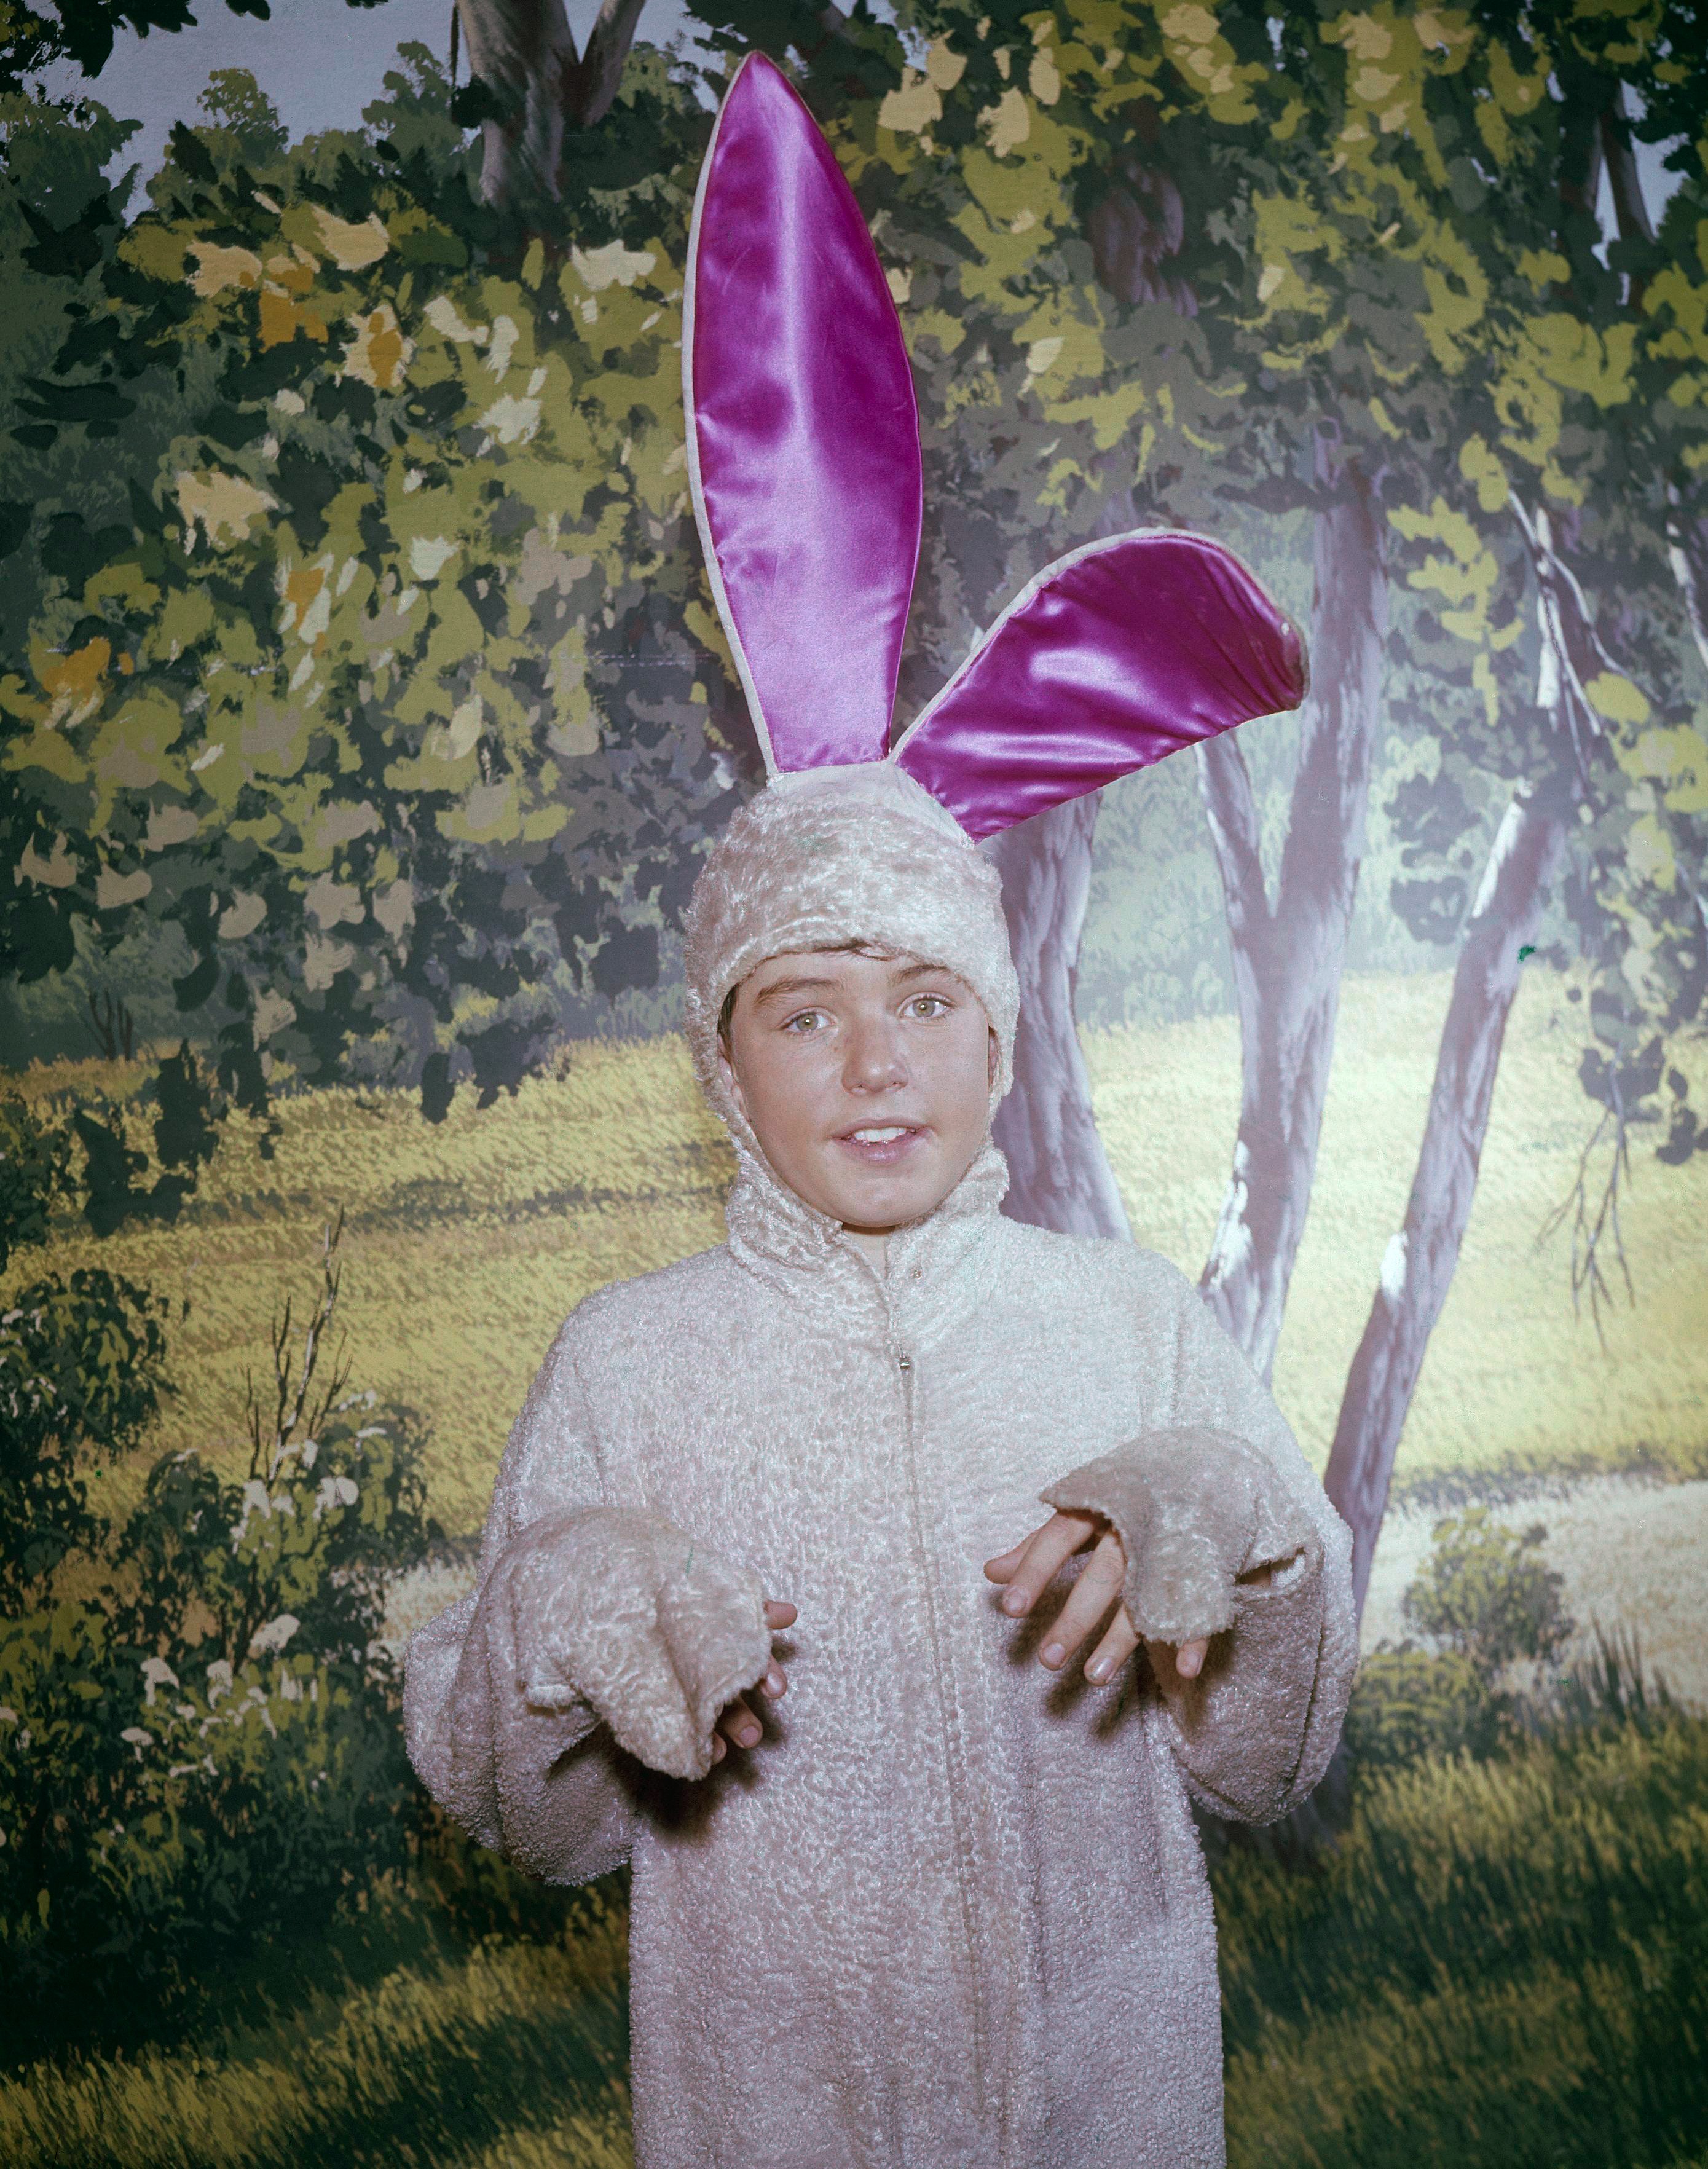 Jerry Mathers posing in an undated "Leave It to Beaver" photo | Source: Getty Images